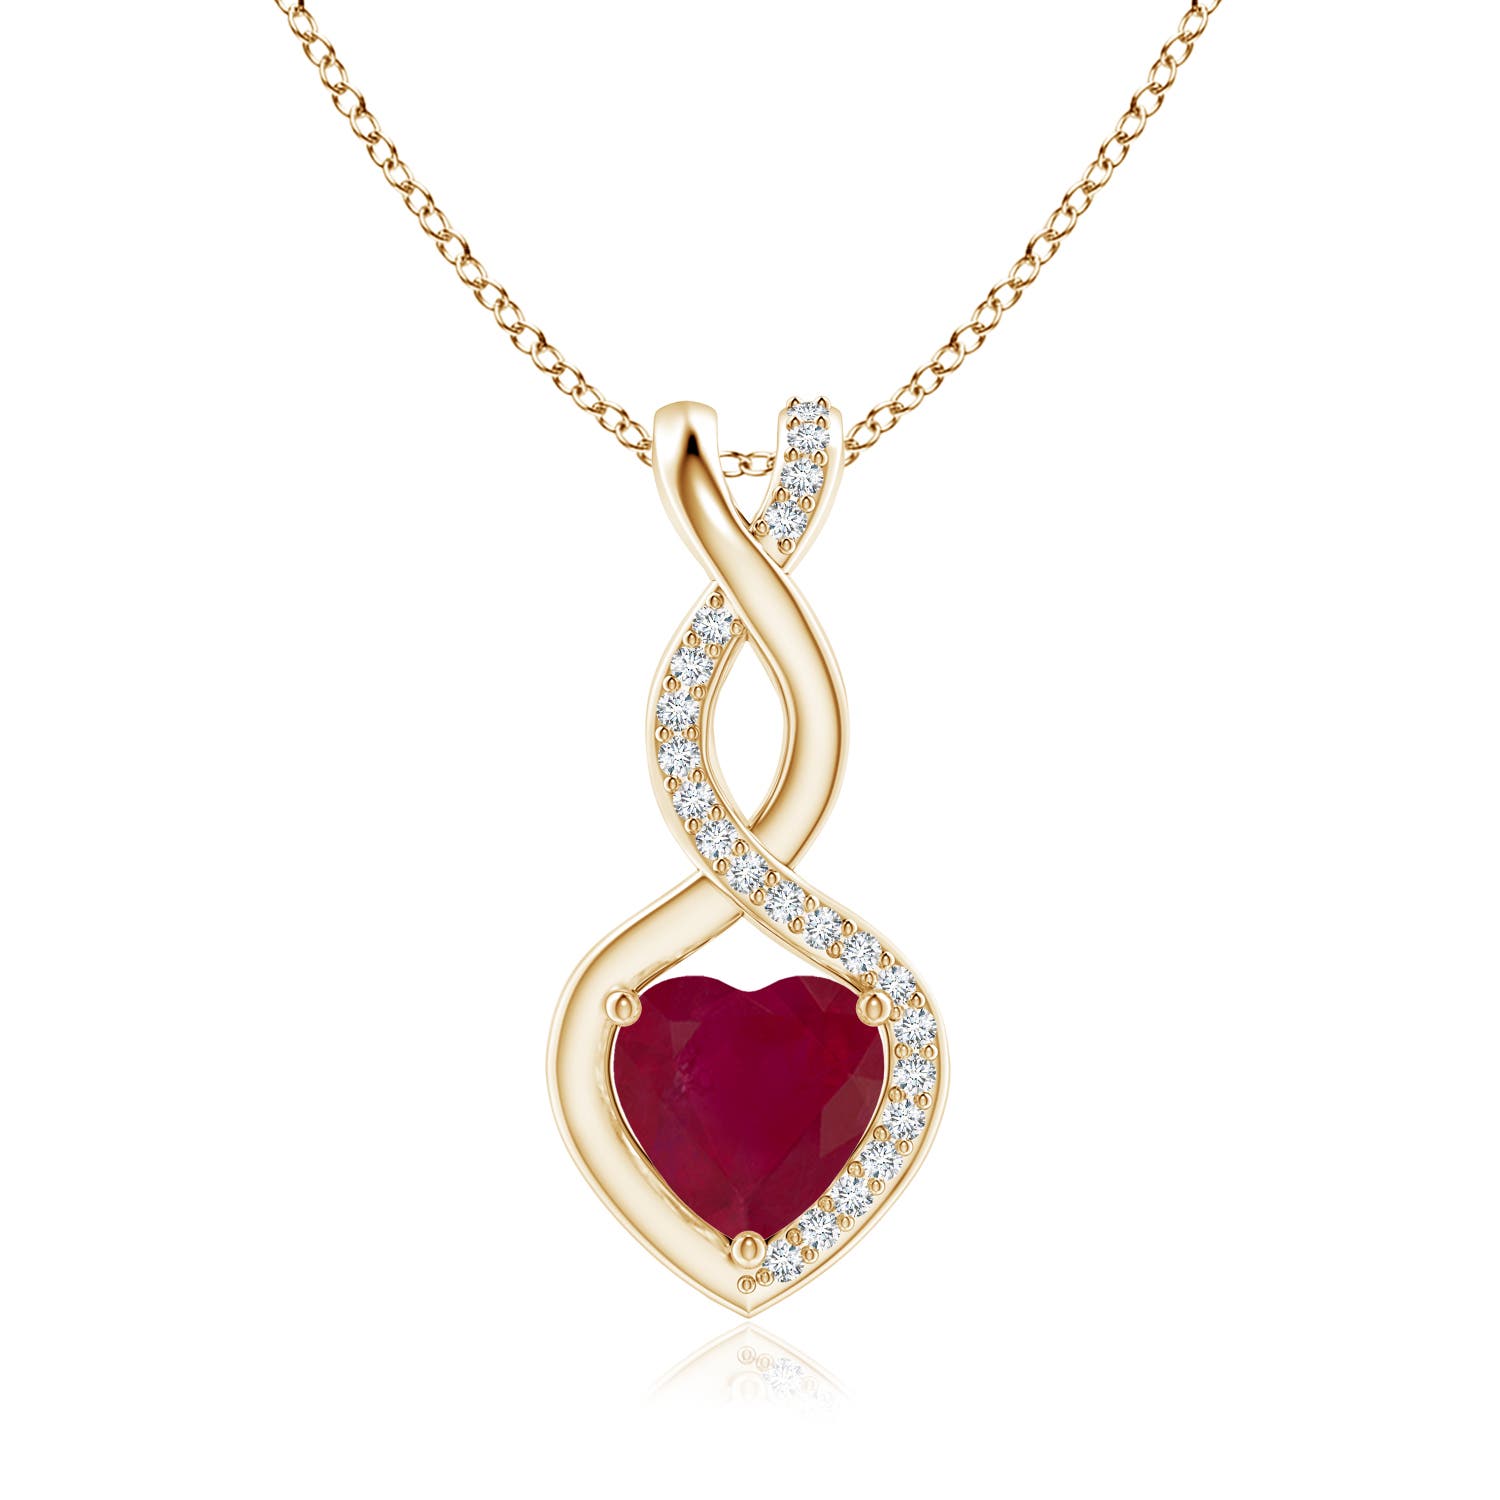 A - Ruby / 0.88 CT / 14 KT Yellow Gold